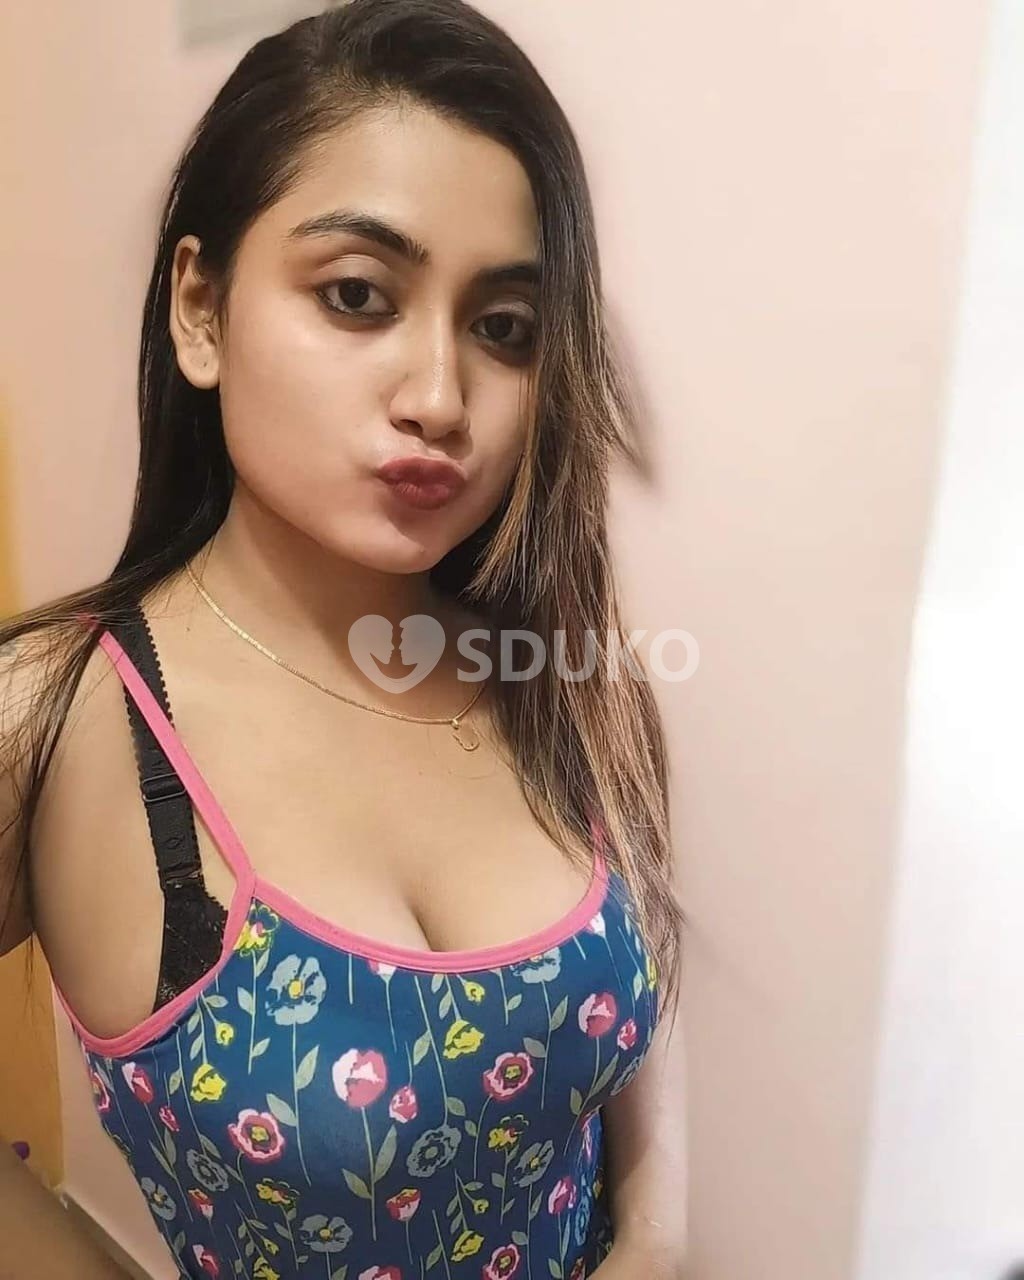 Chennai ❣️❣️Low price high profile college girl and aunty available any time available service genuine vip call 